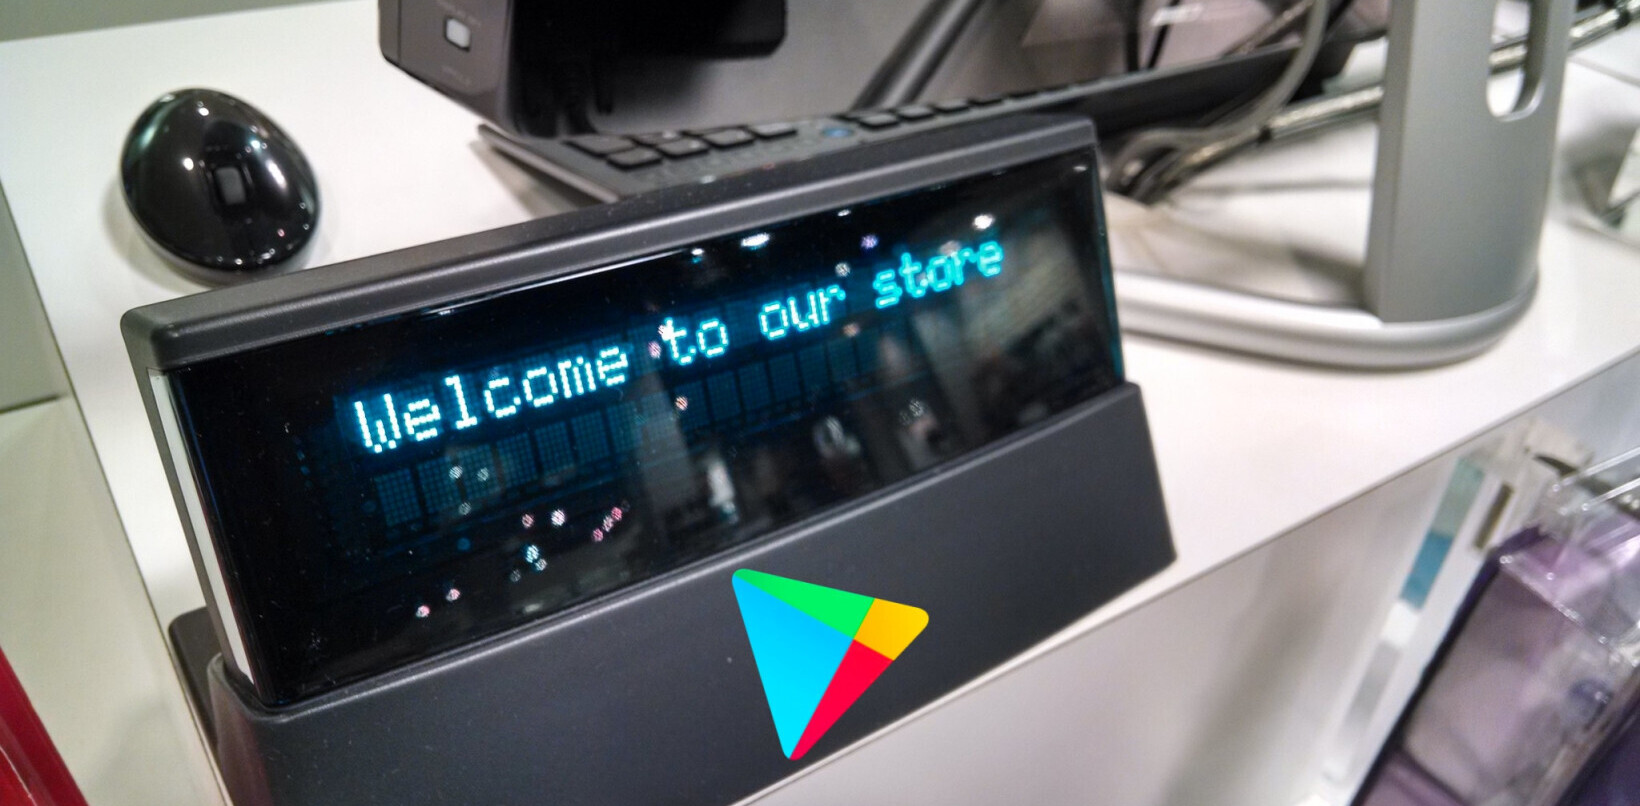 Google Play is experimenting with alternative payments systems — here’s what that means for Android app devs